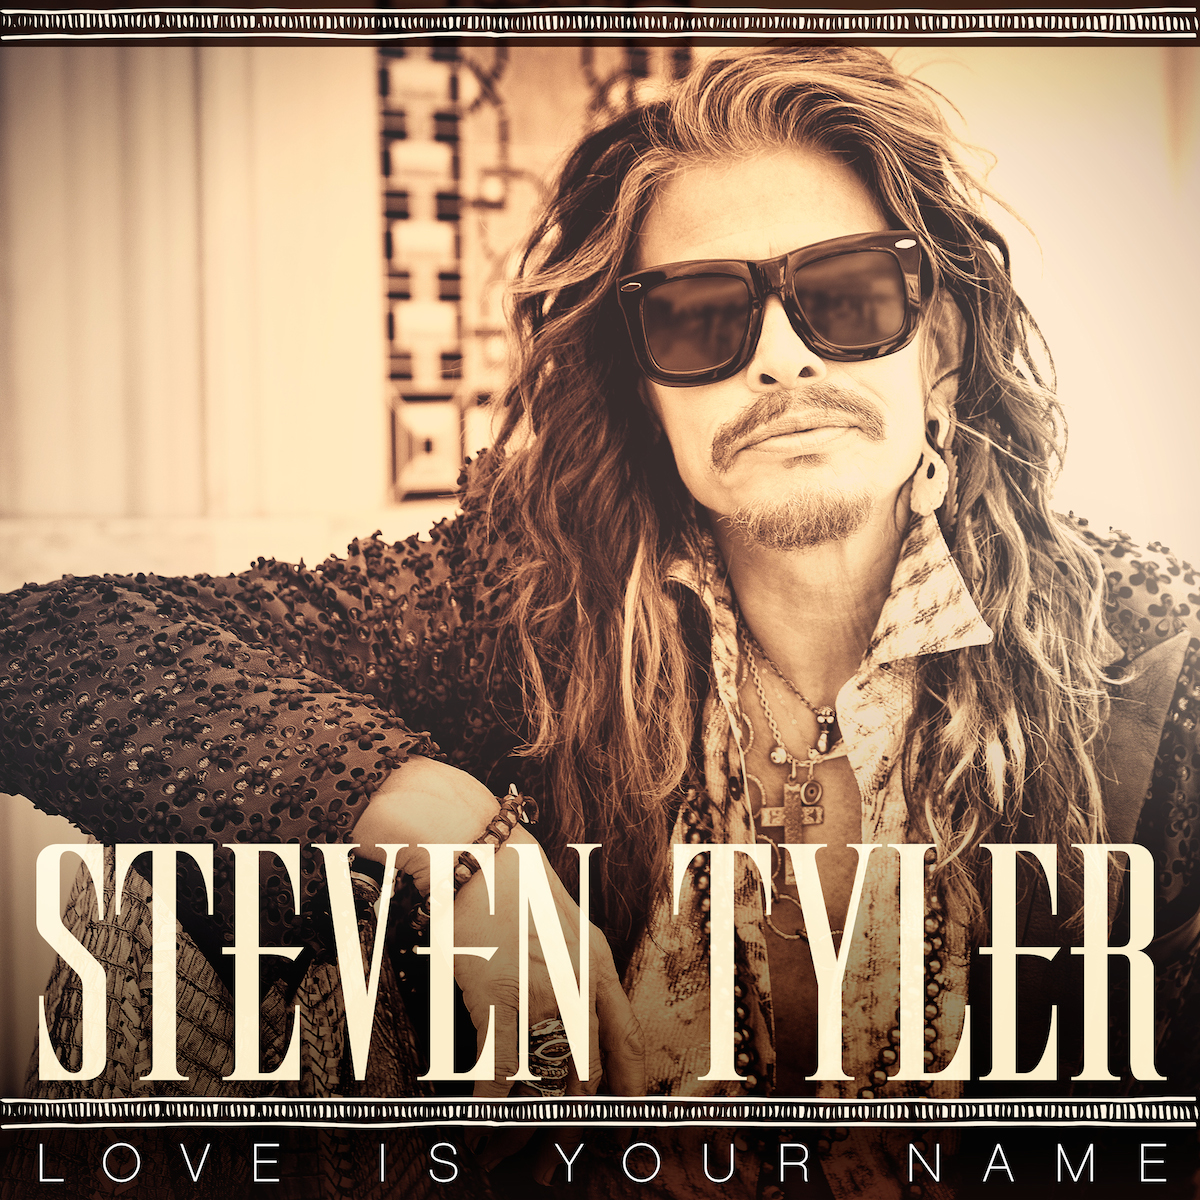 RT @Big955Chicago: Fired up to have @IamStevenT in the studio today w/ @alabamaradio! Listen @ 5p http://t.co/xpNmHtSNV7 #LoveIsYourName ht…